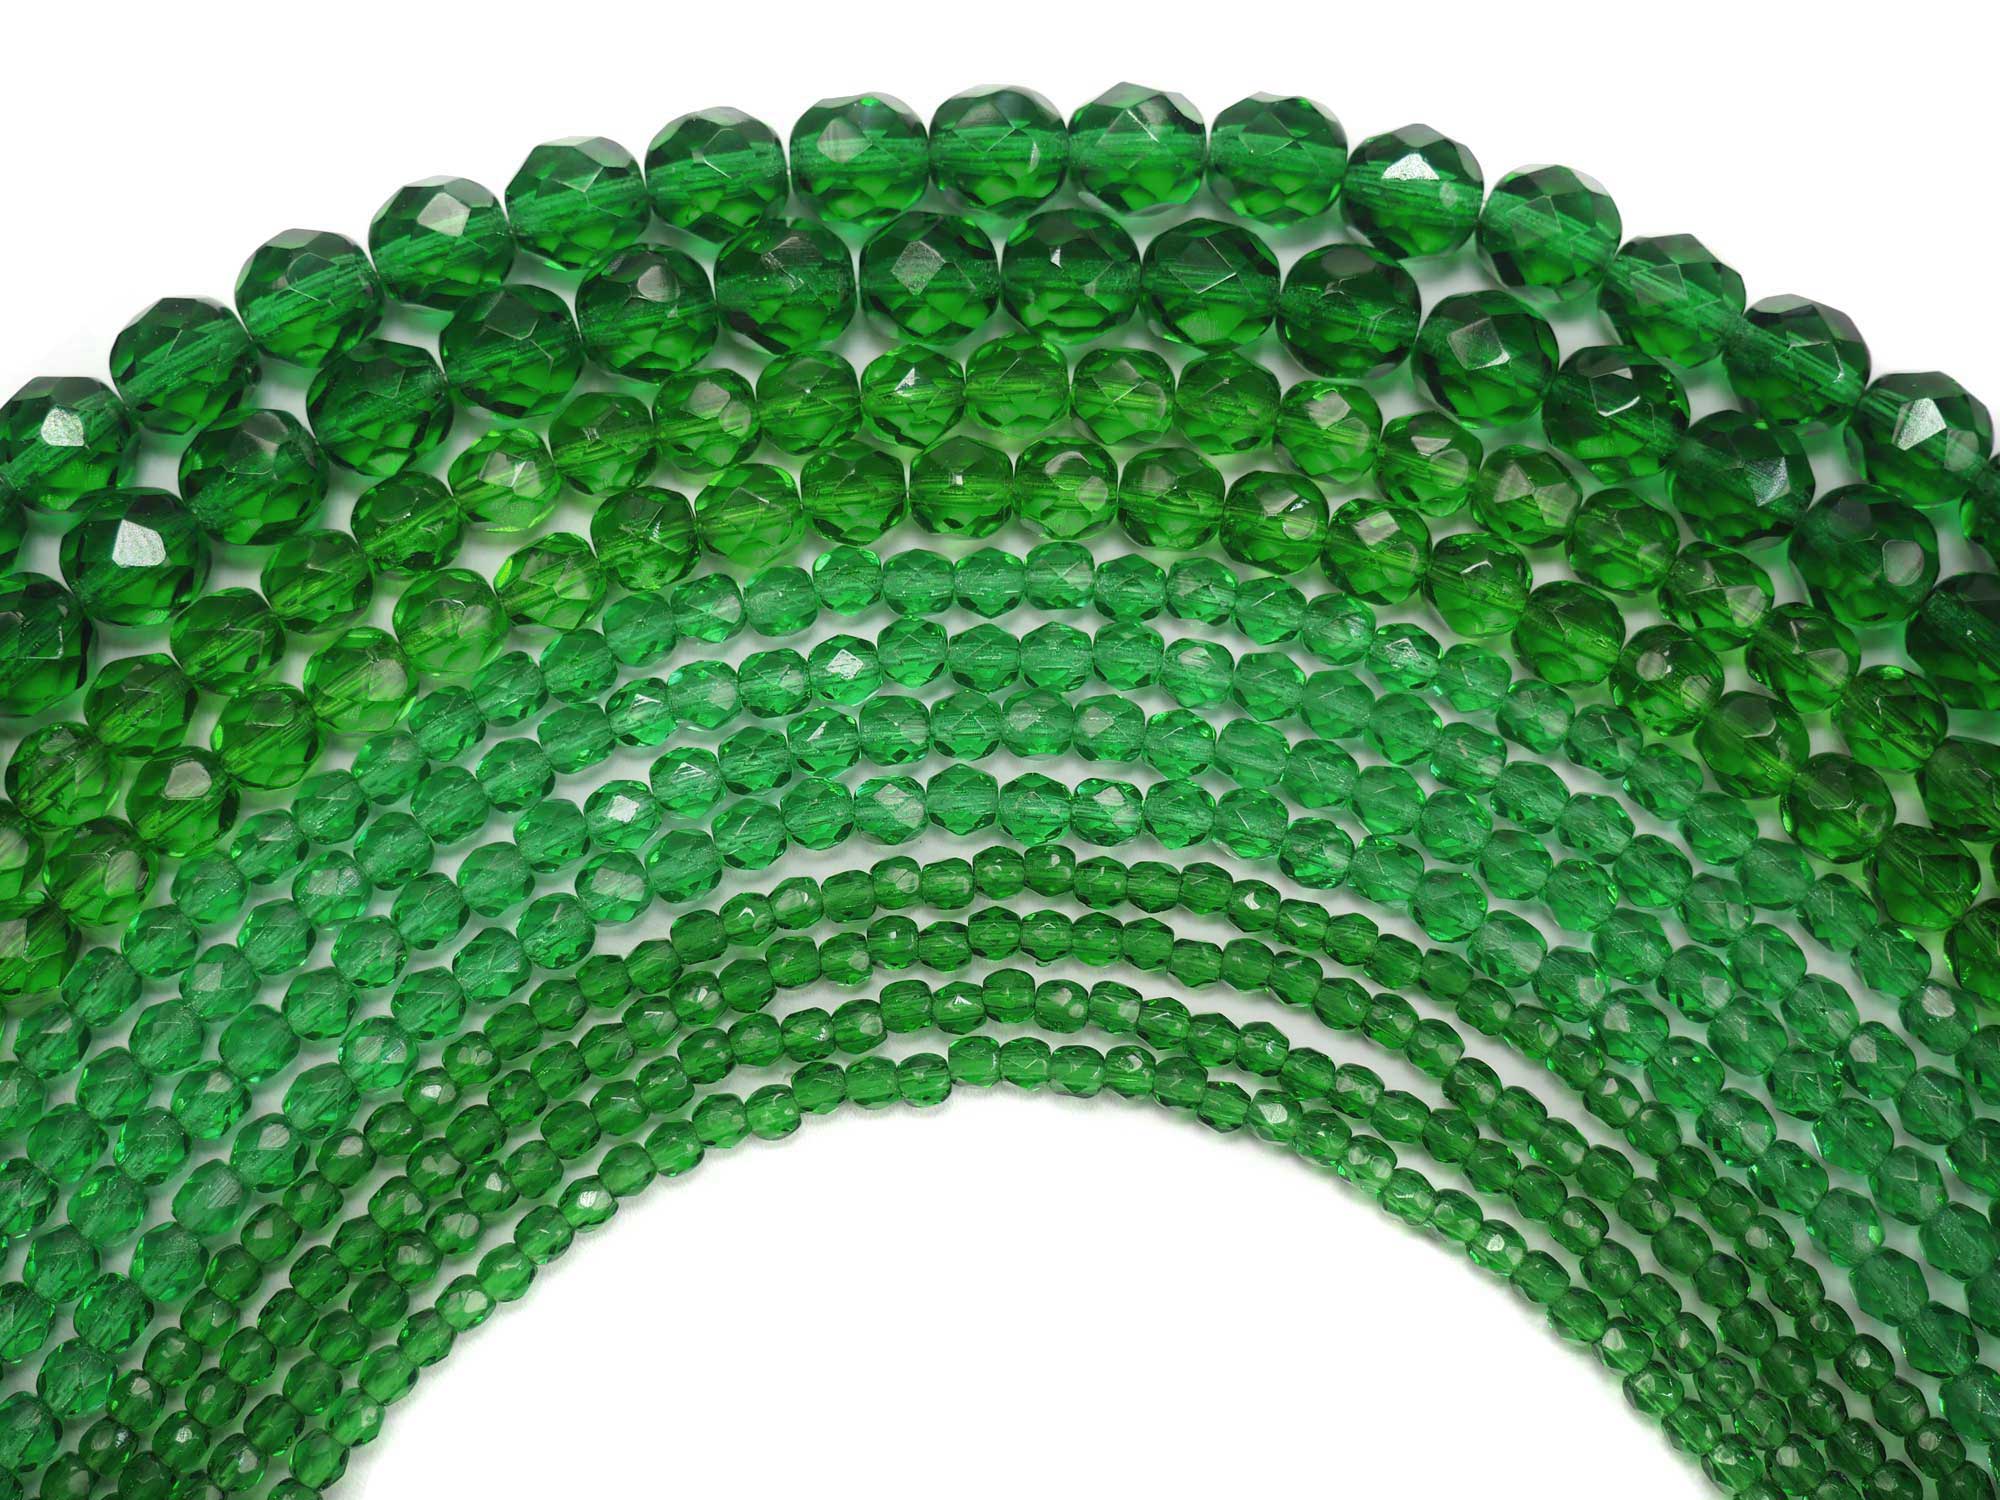 Shamrock Spring Green, loose Czech Fire Polished Round Faceted Glass Beads, light green